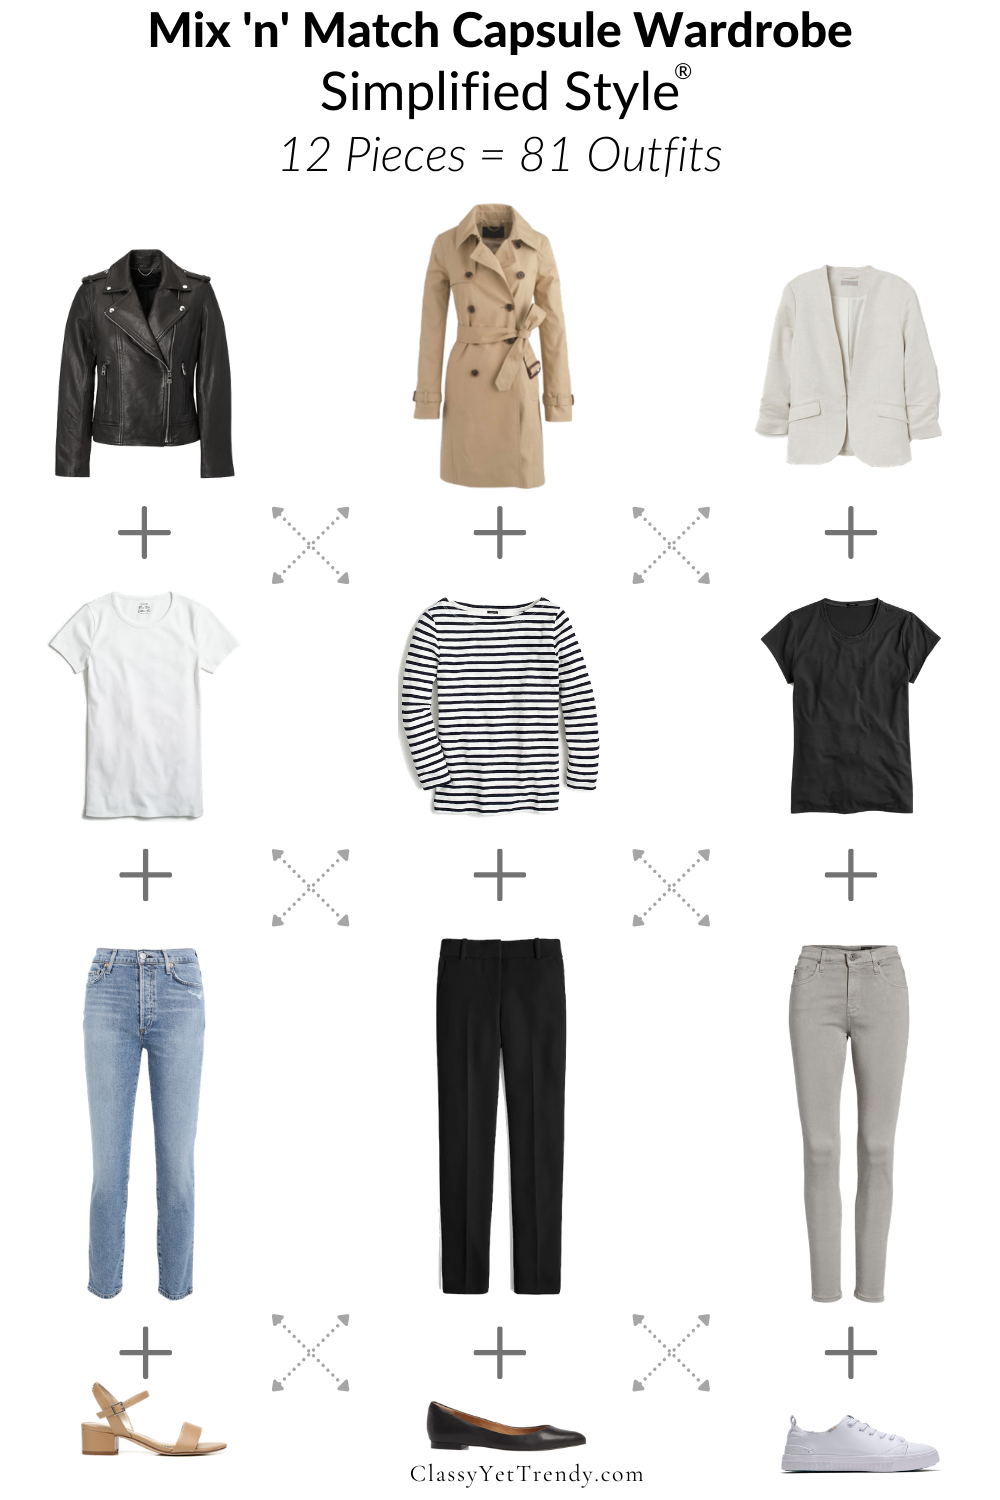 https://classyyettrendy.com/wp-content/uploads/2021/03/Mix-n-Match-Capsule-Wardrobe-Simplified-Style-12-Pieces.png